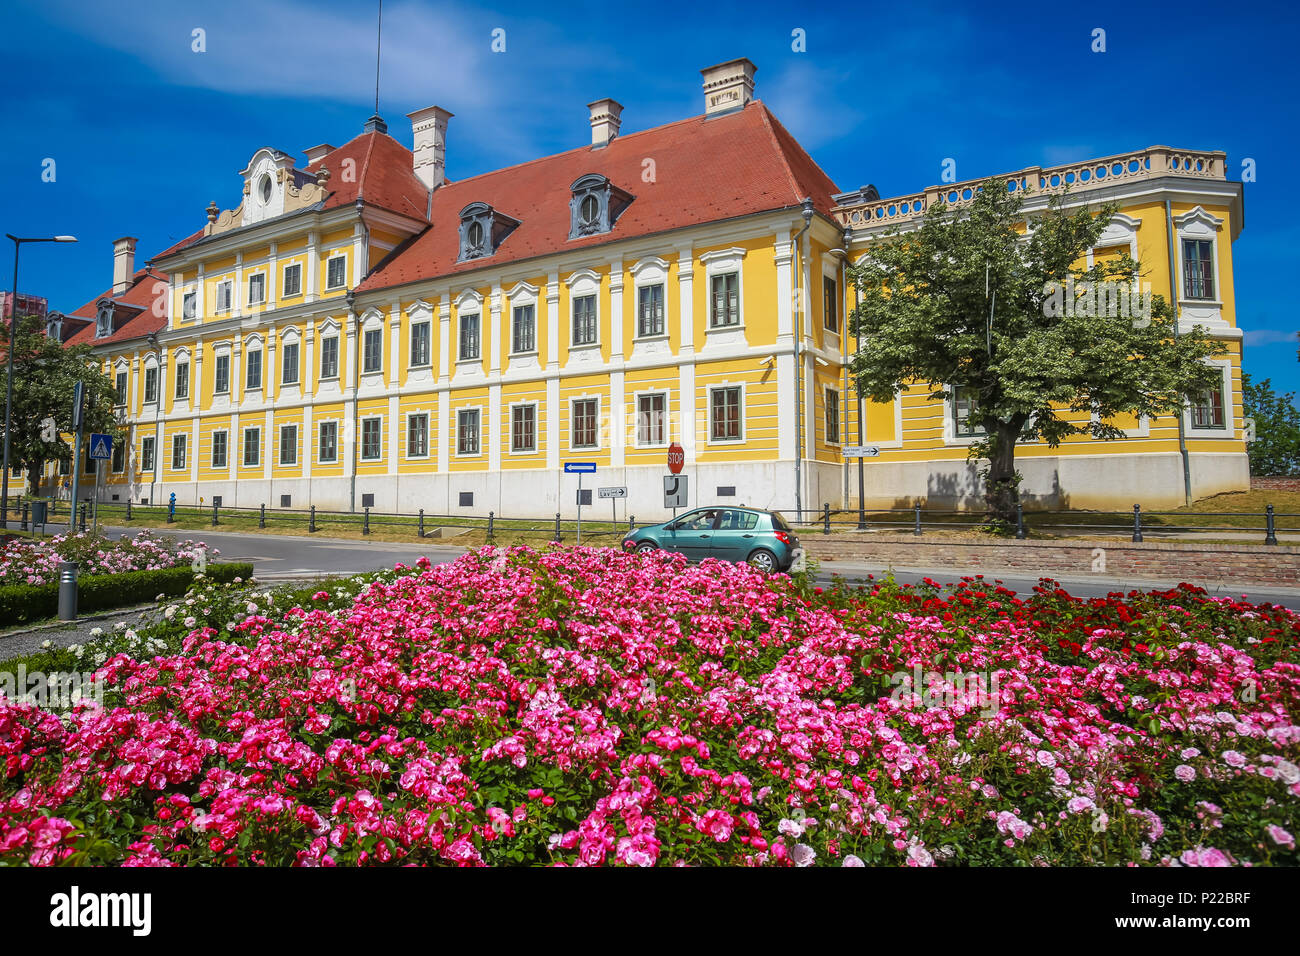 A view of the pink flowers with the City museum located in the Eltz castle in Vukovar, Croatia. Stock Photo